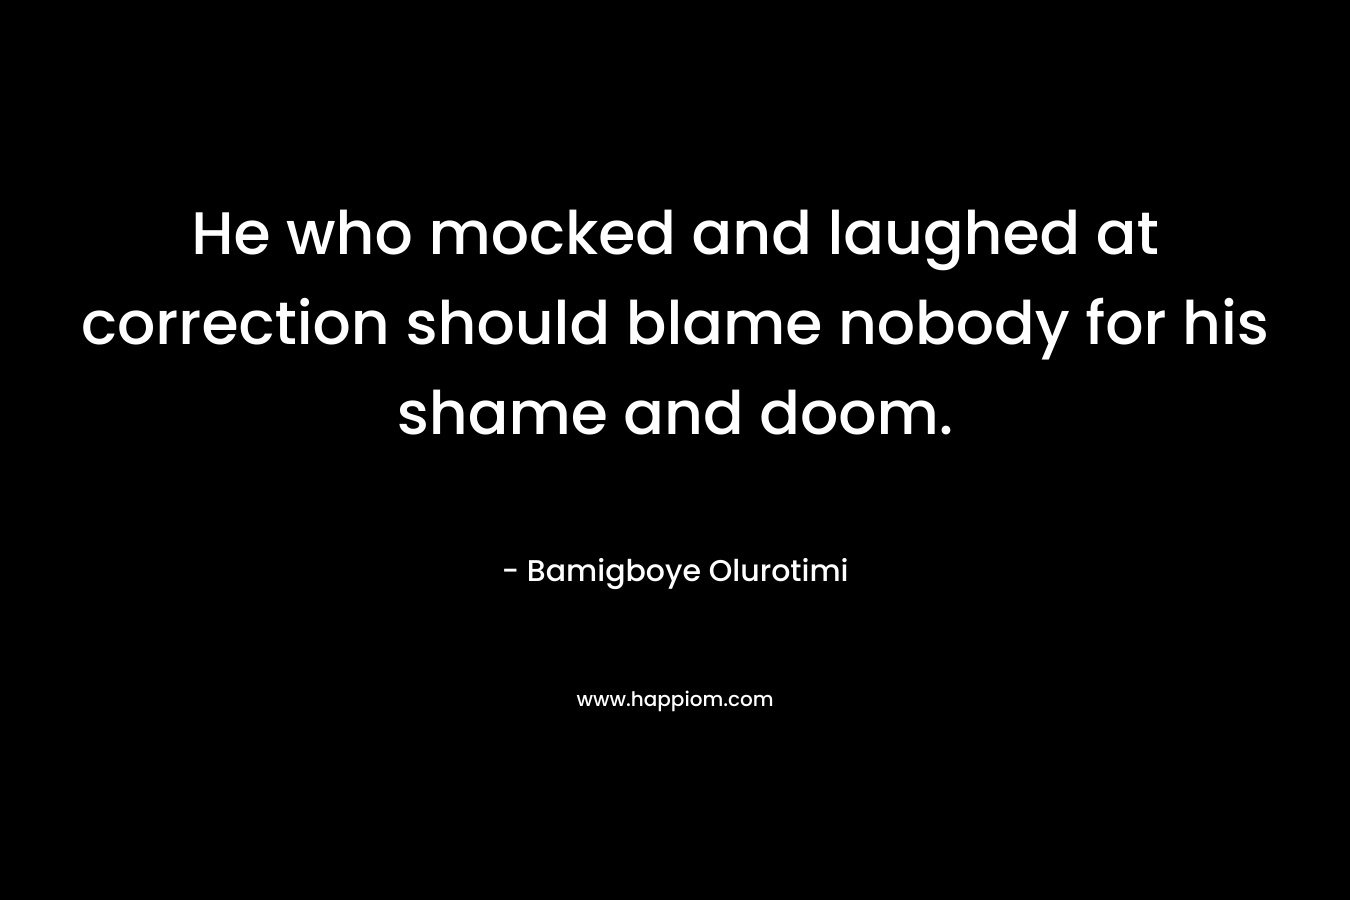 He who mocked and laughed at correction should blame nobody for his shame and doom.